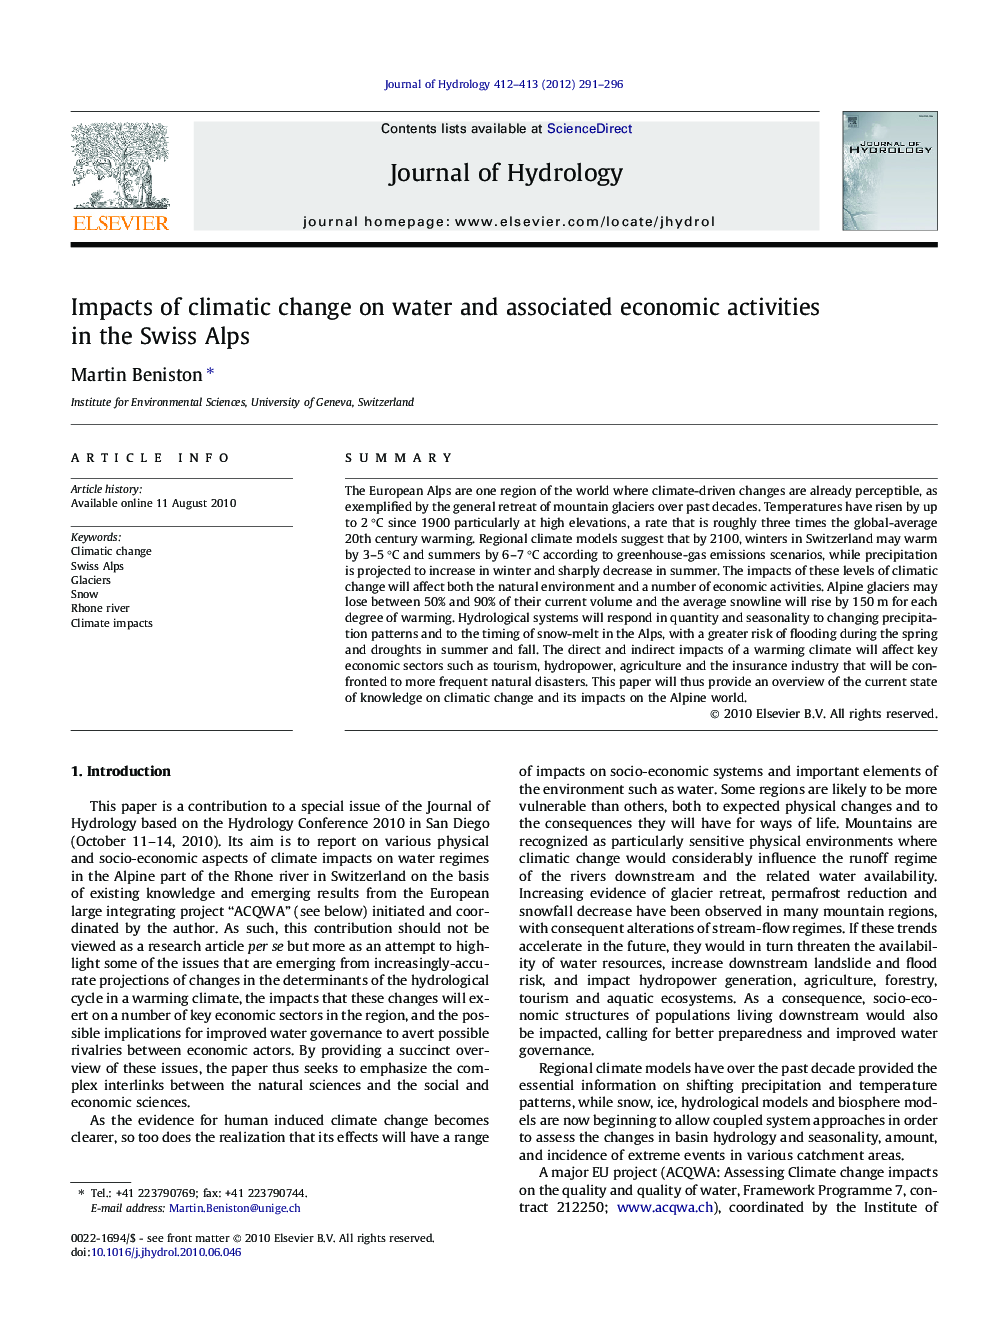 Impacts of climatic change on water and associated economic activities in the Swiss Alps